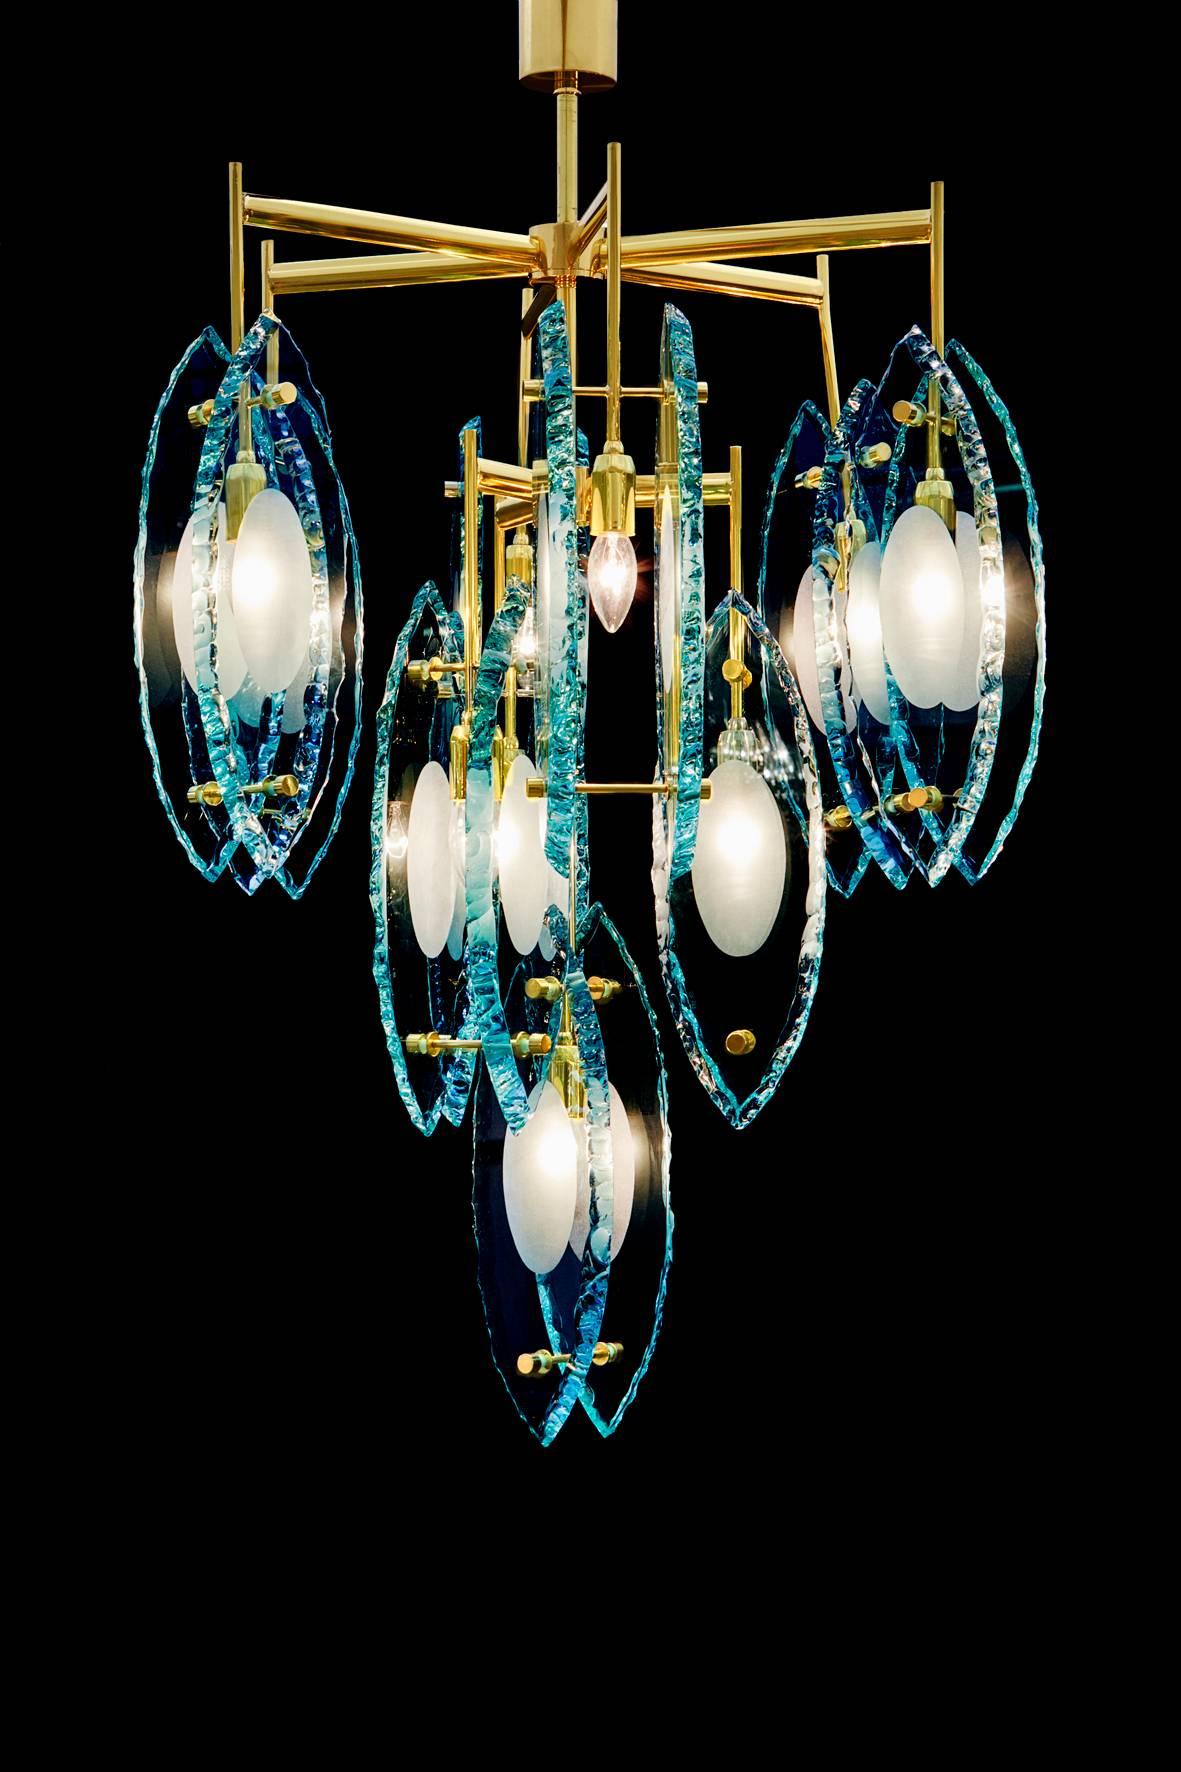 Limited edition Italian chandelier with thick etched glasses, mounted on polished brass frame / Exclusively designed by Gianluca Fontana for Fabio Ltd / Made in Italy
10 lights / E12 or E14 type / max 40W each
Diameter: 28 inches / Height: 44 inches